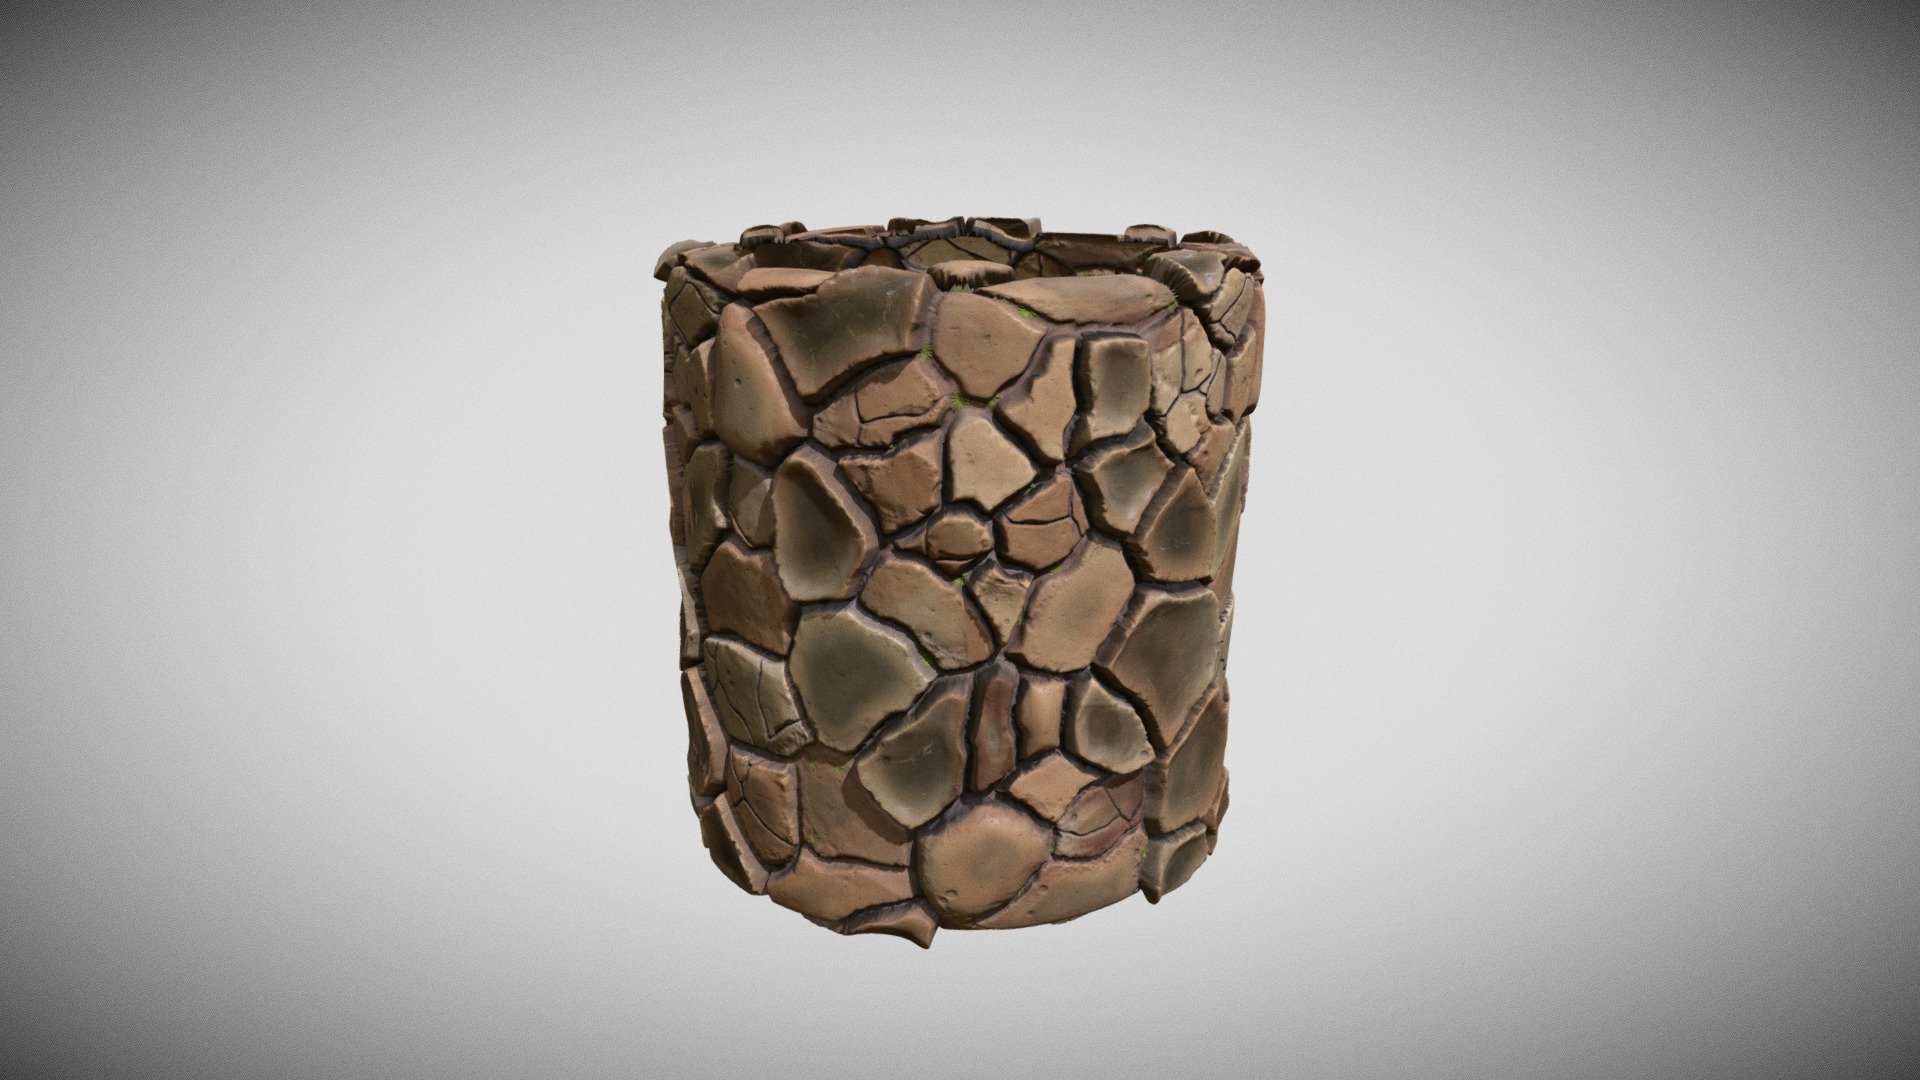 Materials(PBR), All for free, enjoy and use them for what you want

PBR Materials

textures Include Diffuse/Base Color, Roughness, Normal, Height - Stylized Hexagon irregular ground - Material - Download Free 3D model by Alberto3d (@albertodiaz3d) 3d model